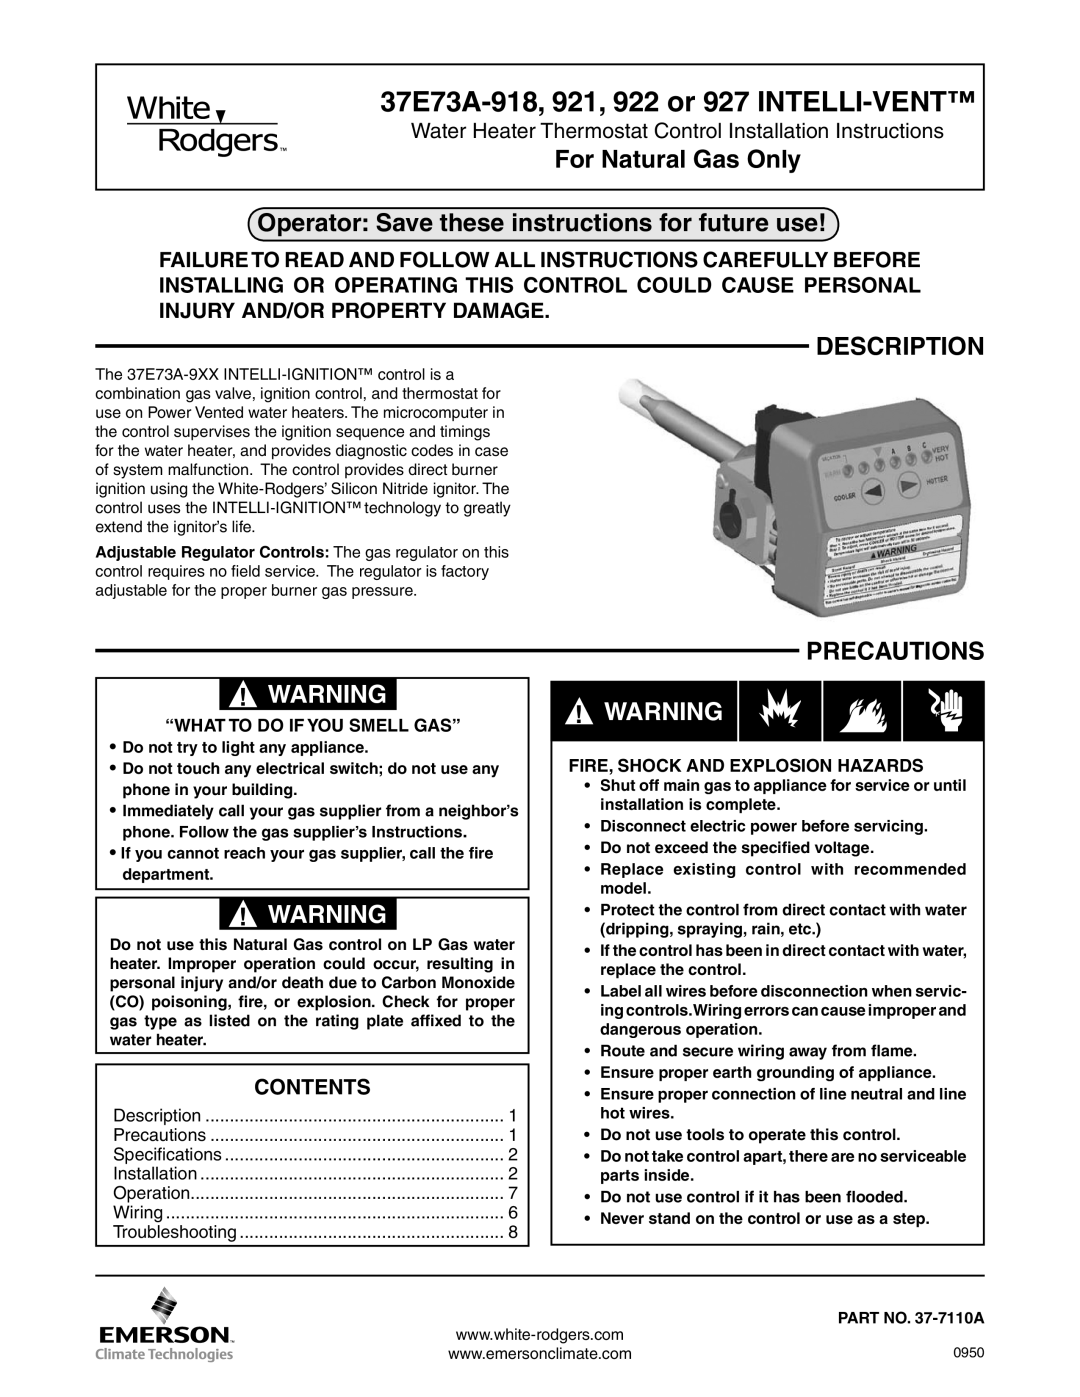 White Rodgers 922, 927, 921 installation instructions For Natural Gas Only, Operator Save these instructions for future use 